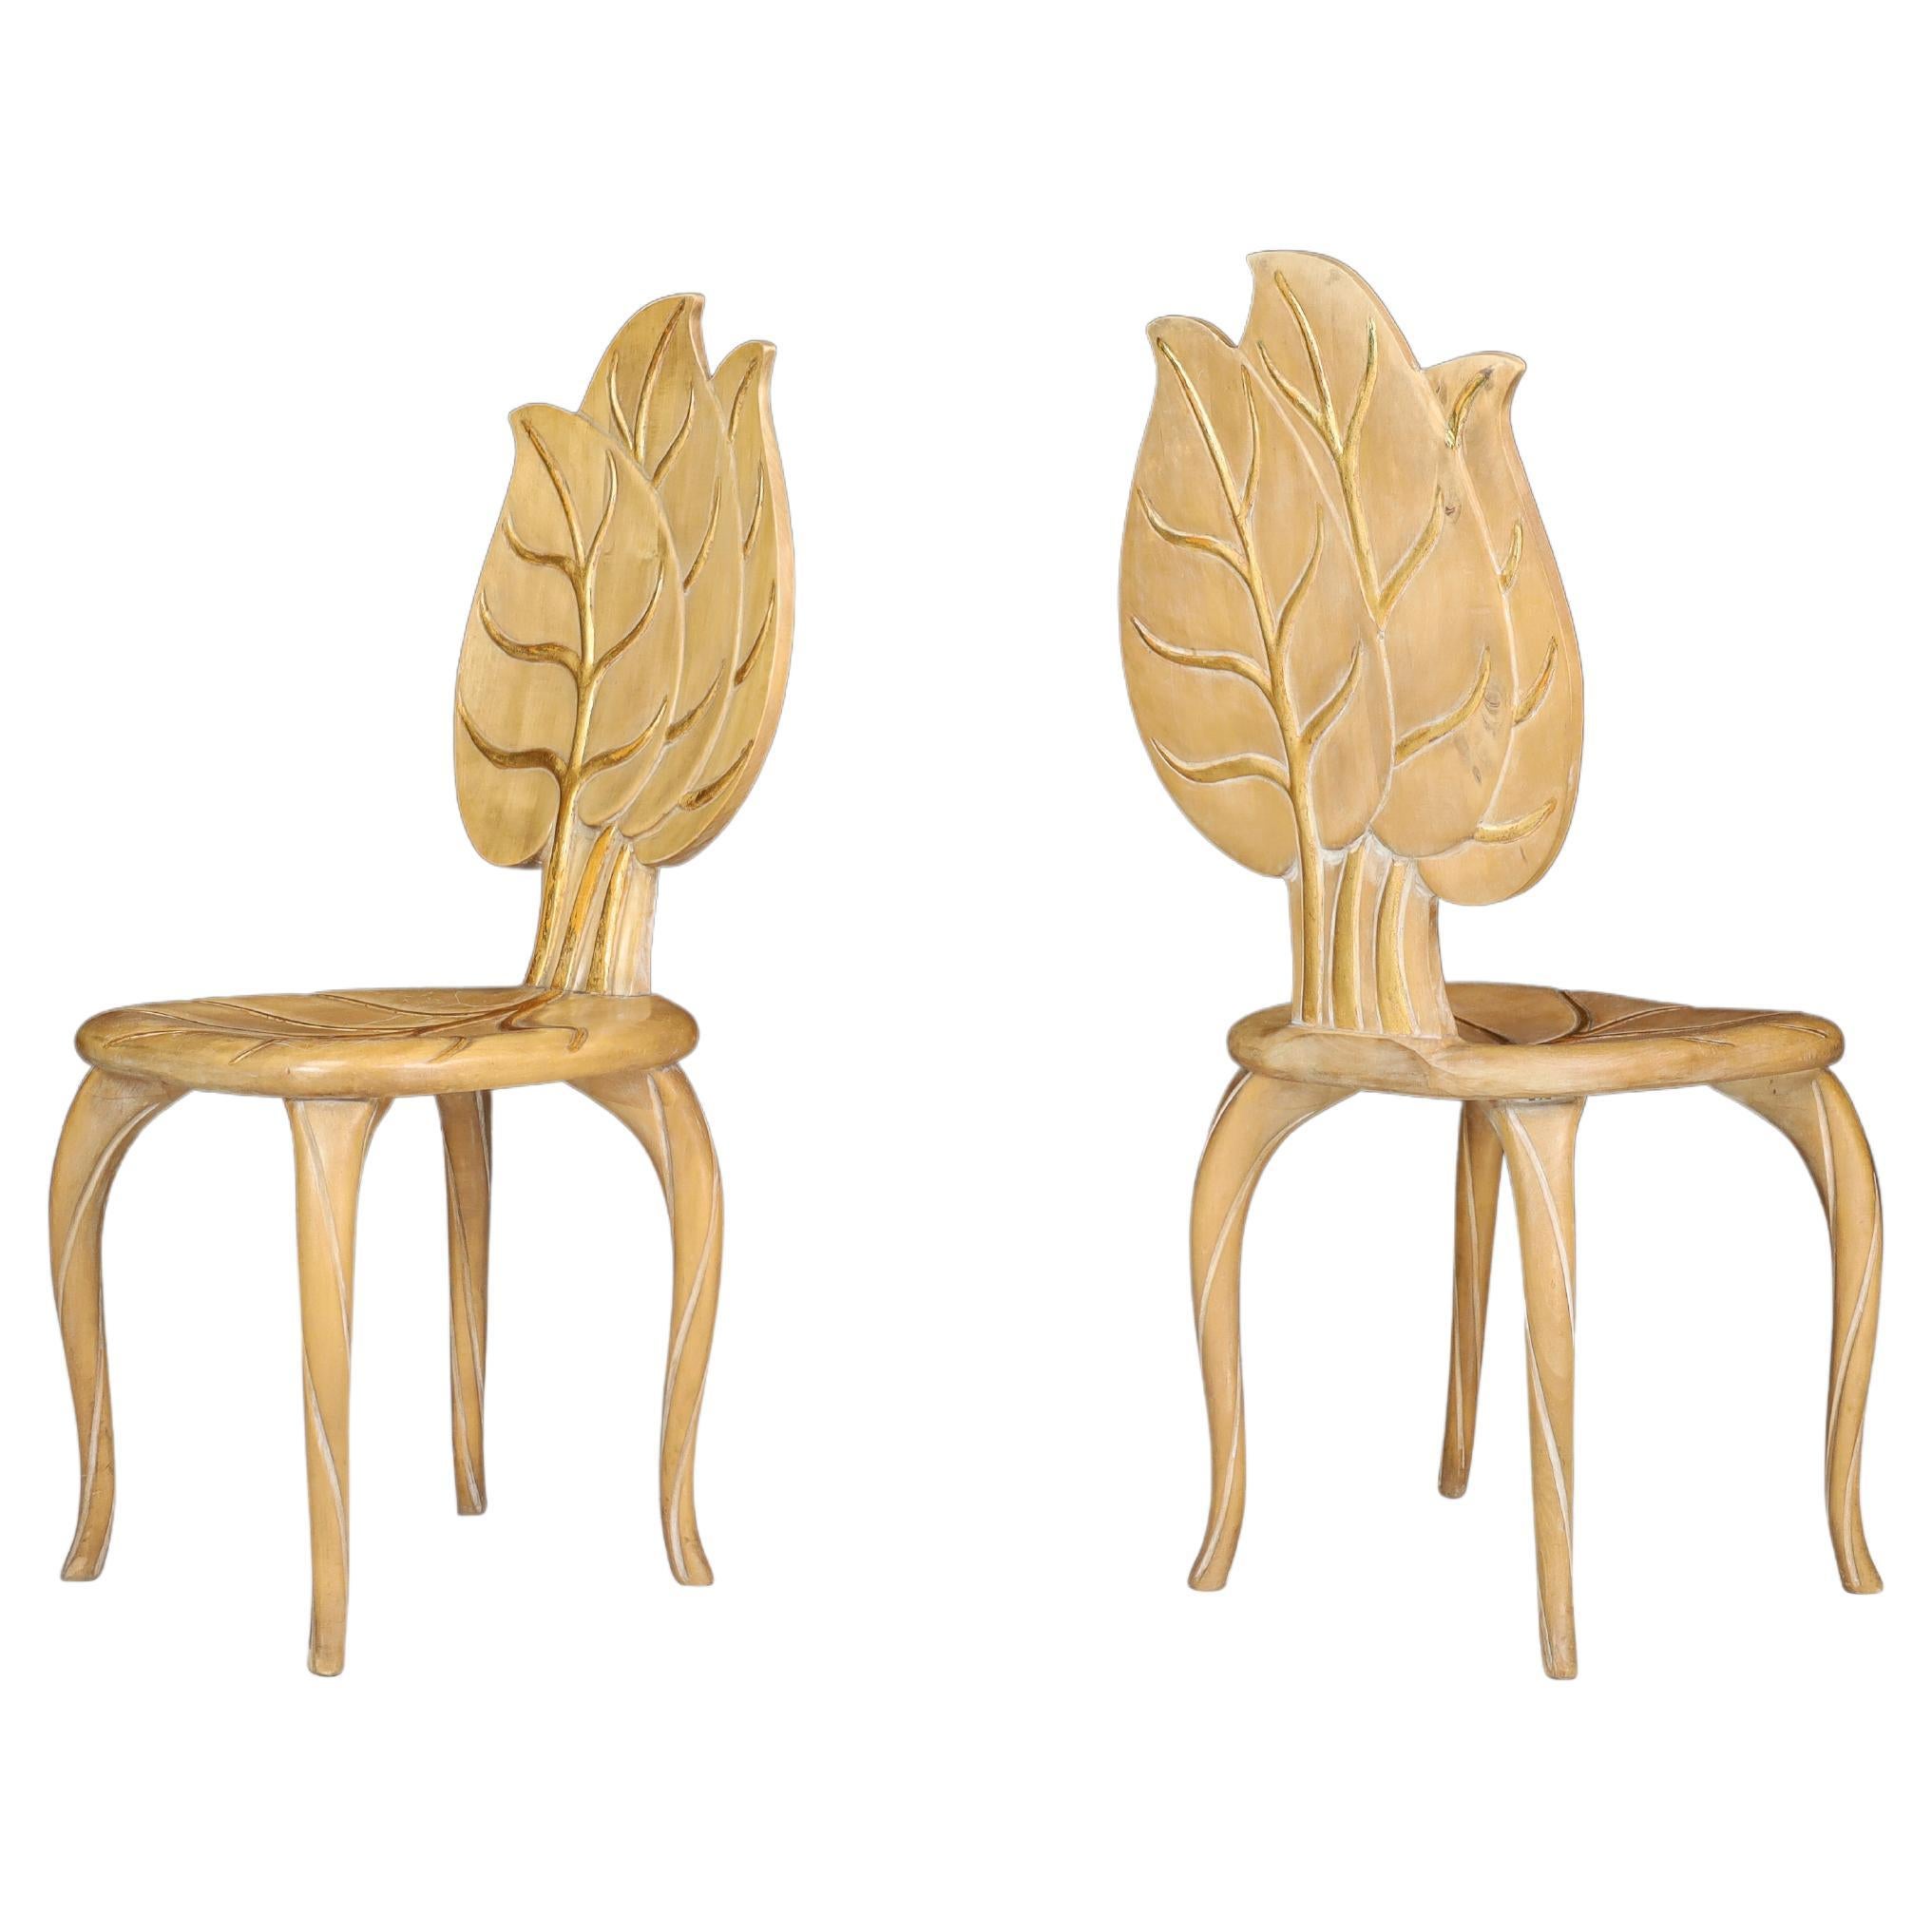 Bartolozzi & Maioli Wooden and Gold Leaf Chairs, Italy, 1970s 